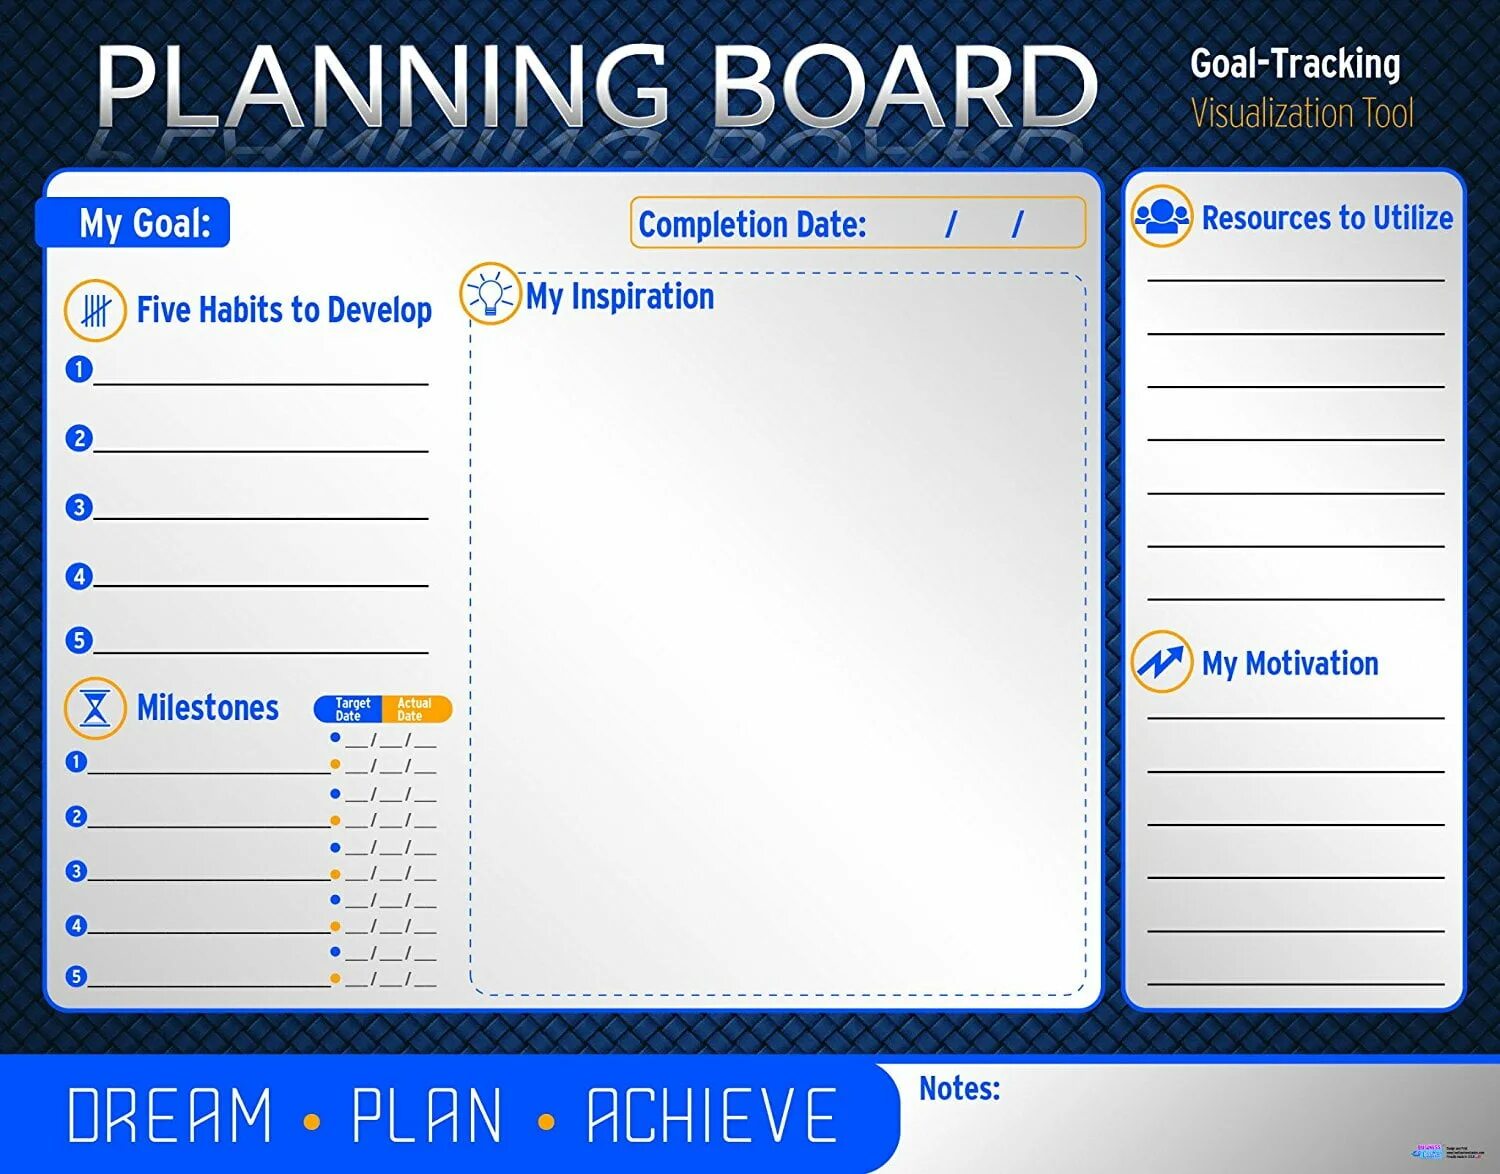 Planning board. Planning and goal setting. Cheap planning. Planning goals Habit.